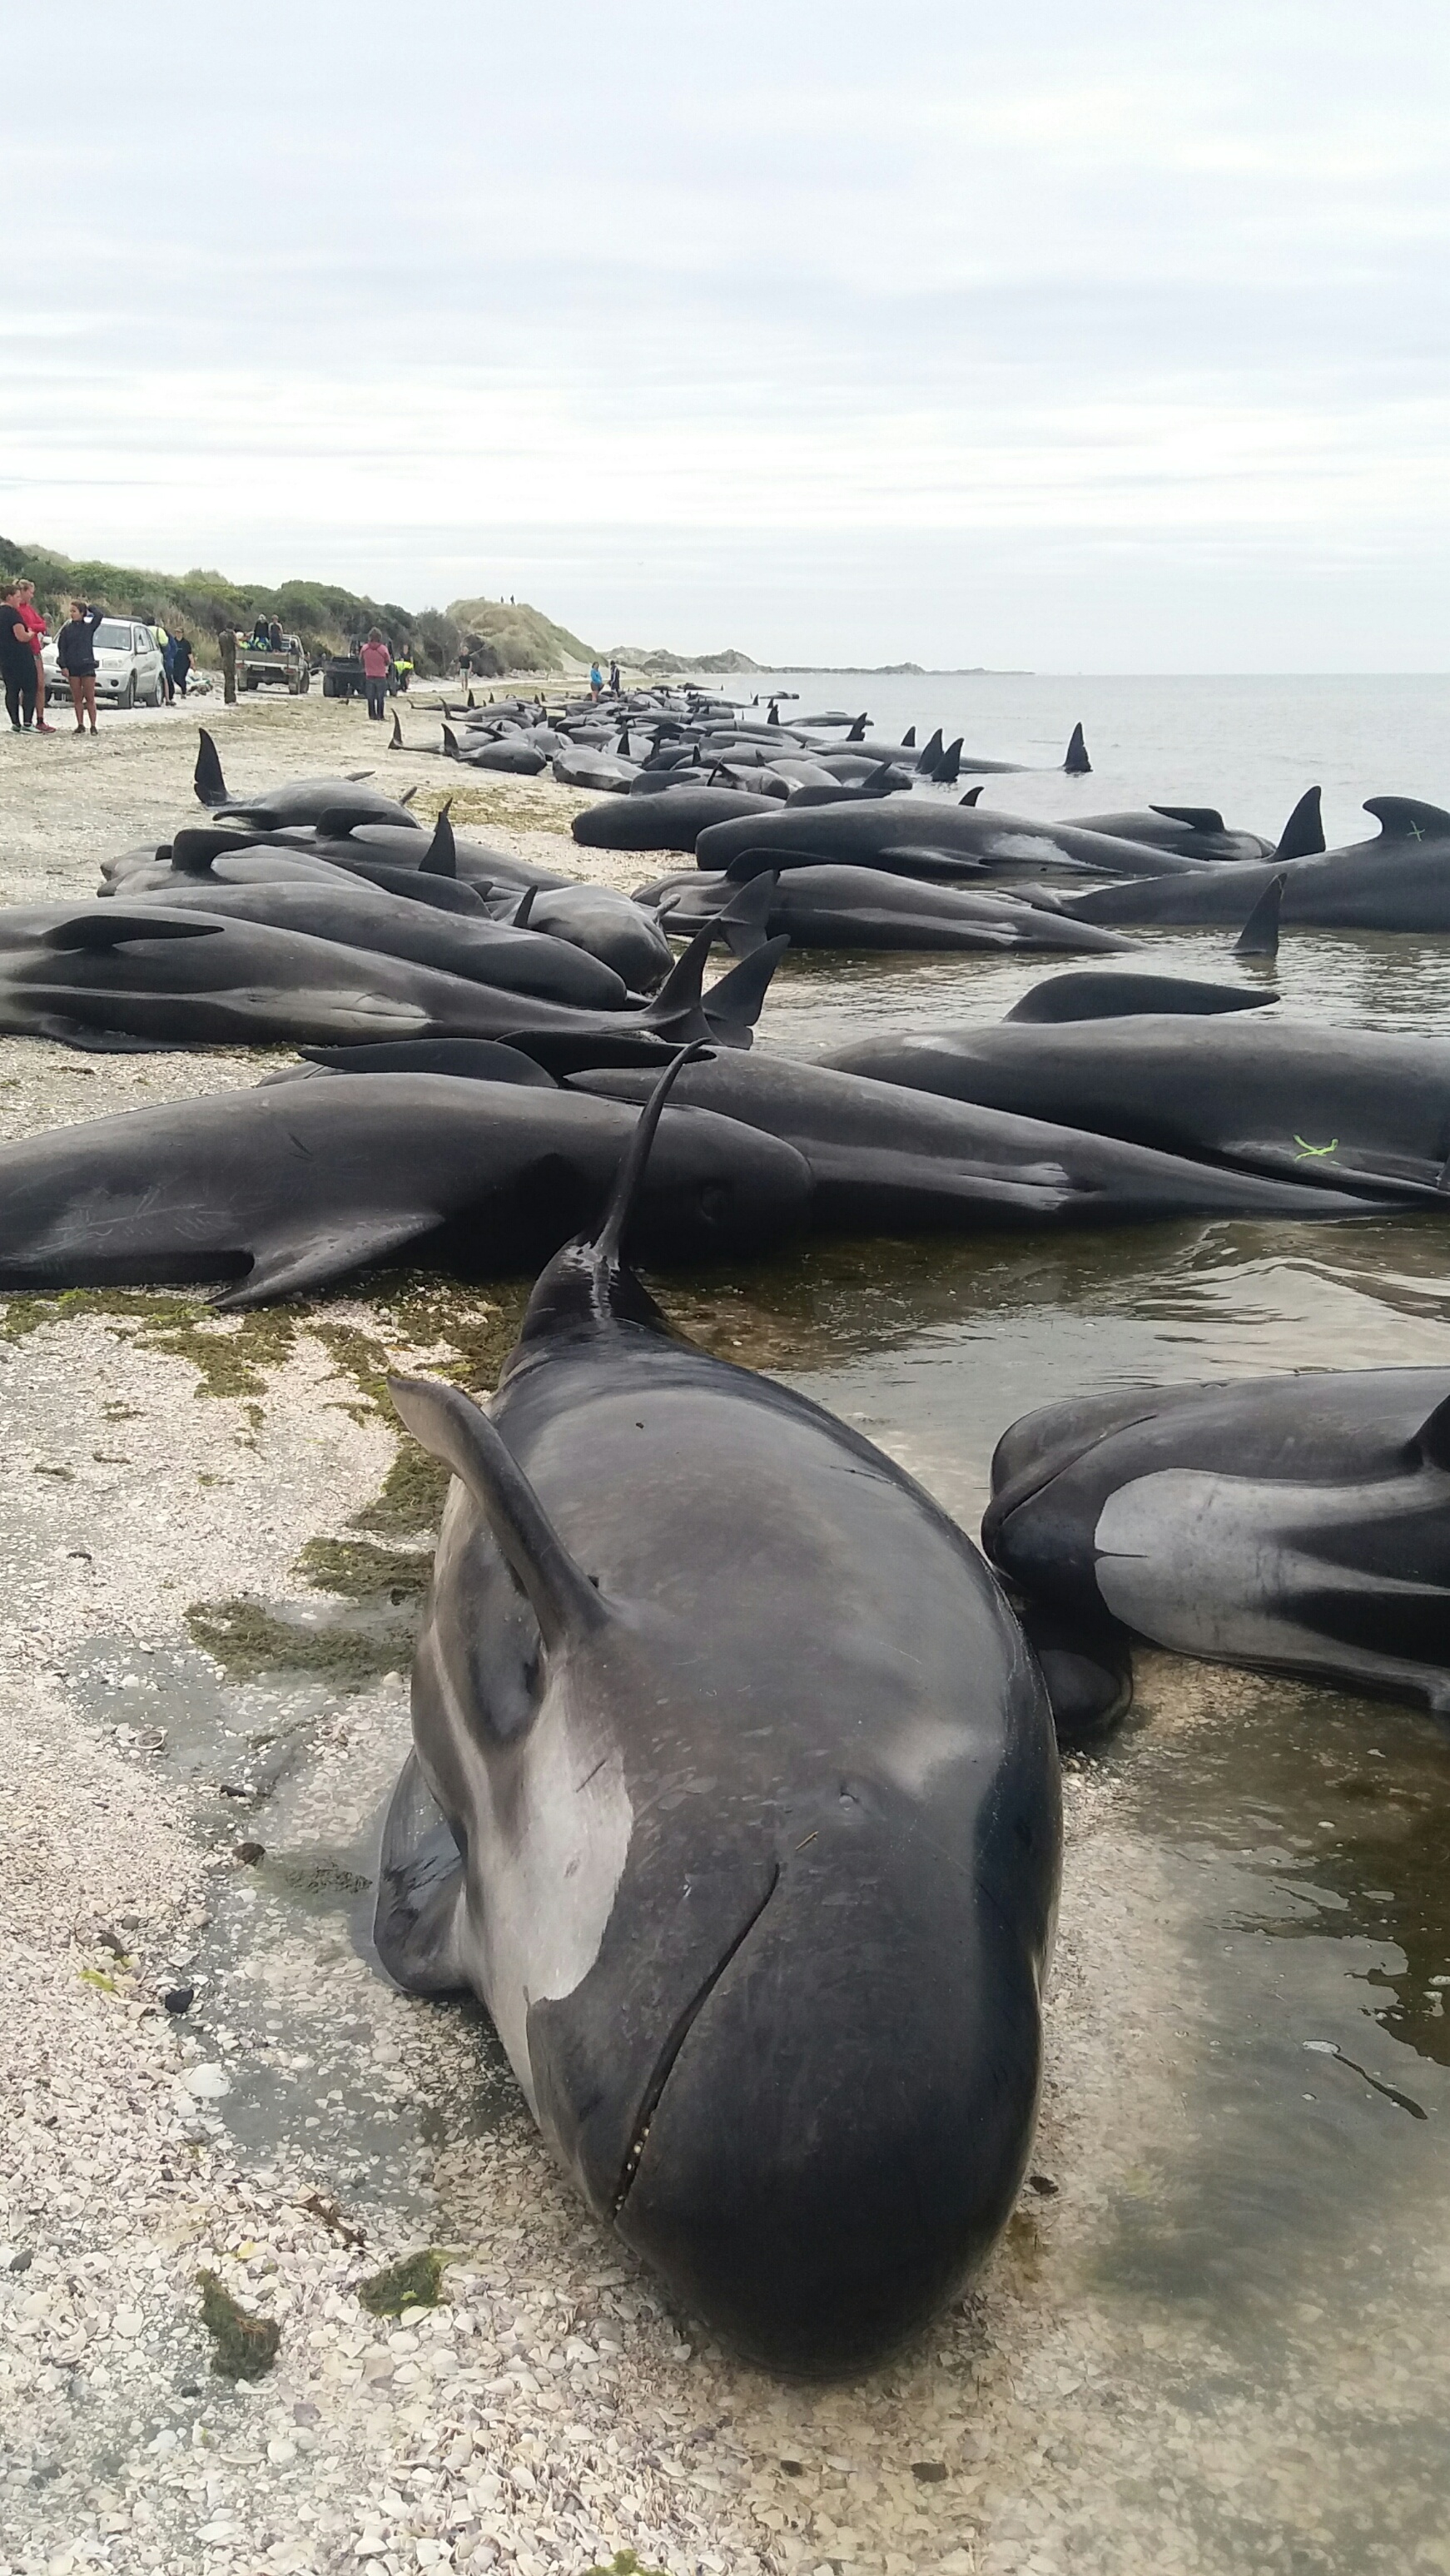 Around 300 pilot whales died after becoming stranded on Farewell Spit. Photo / Tim Cuff